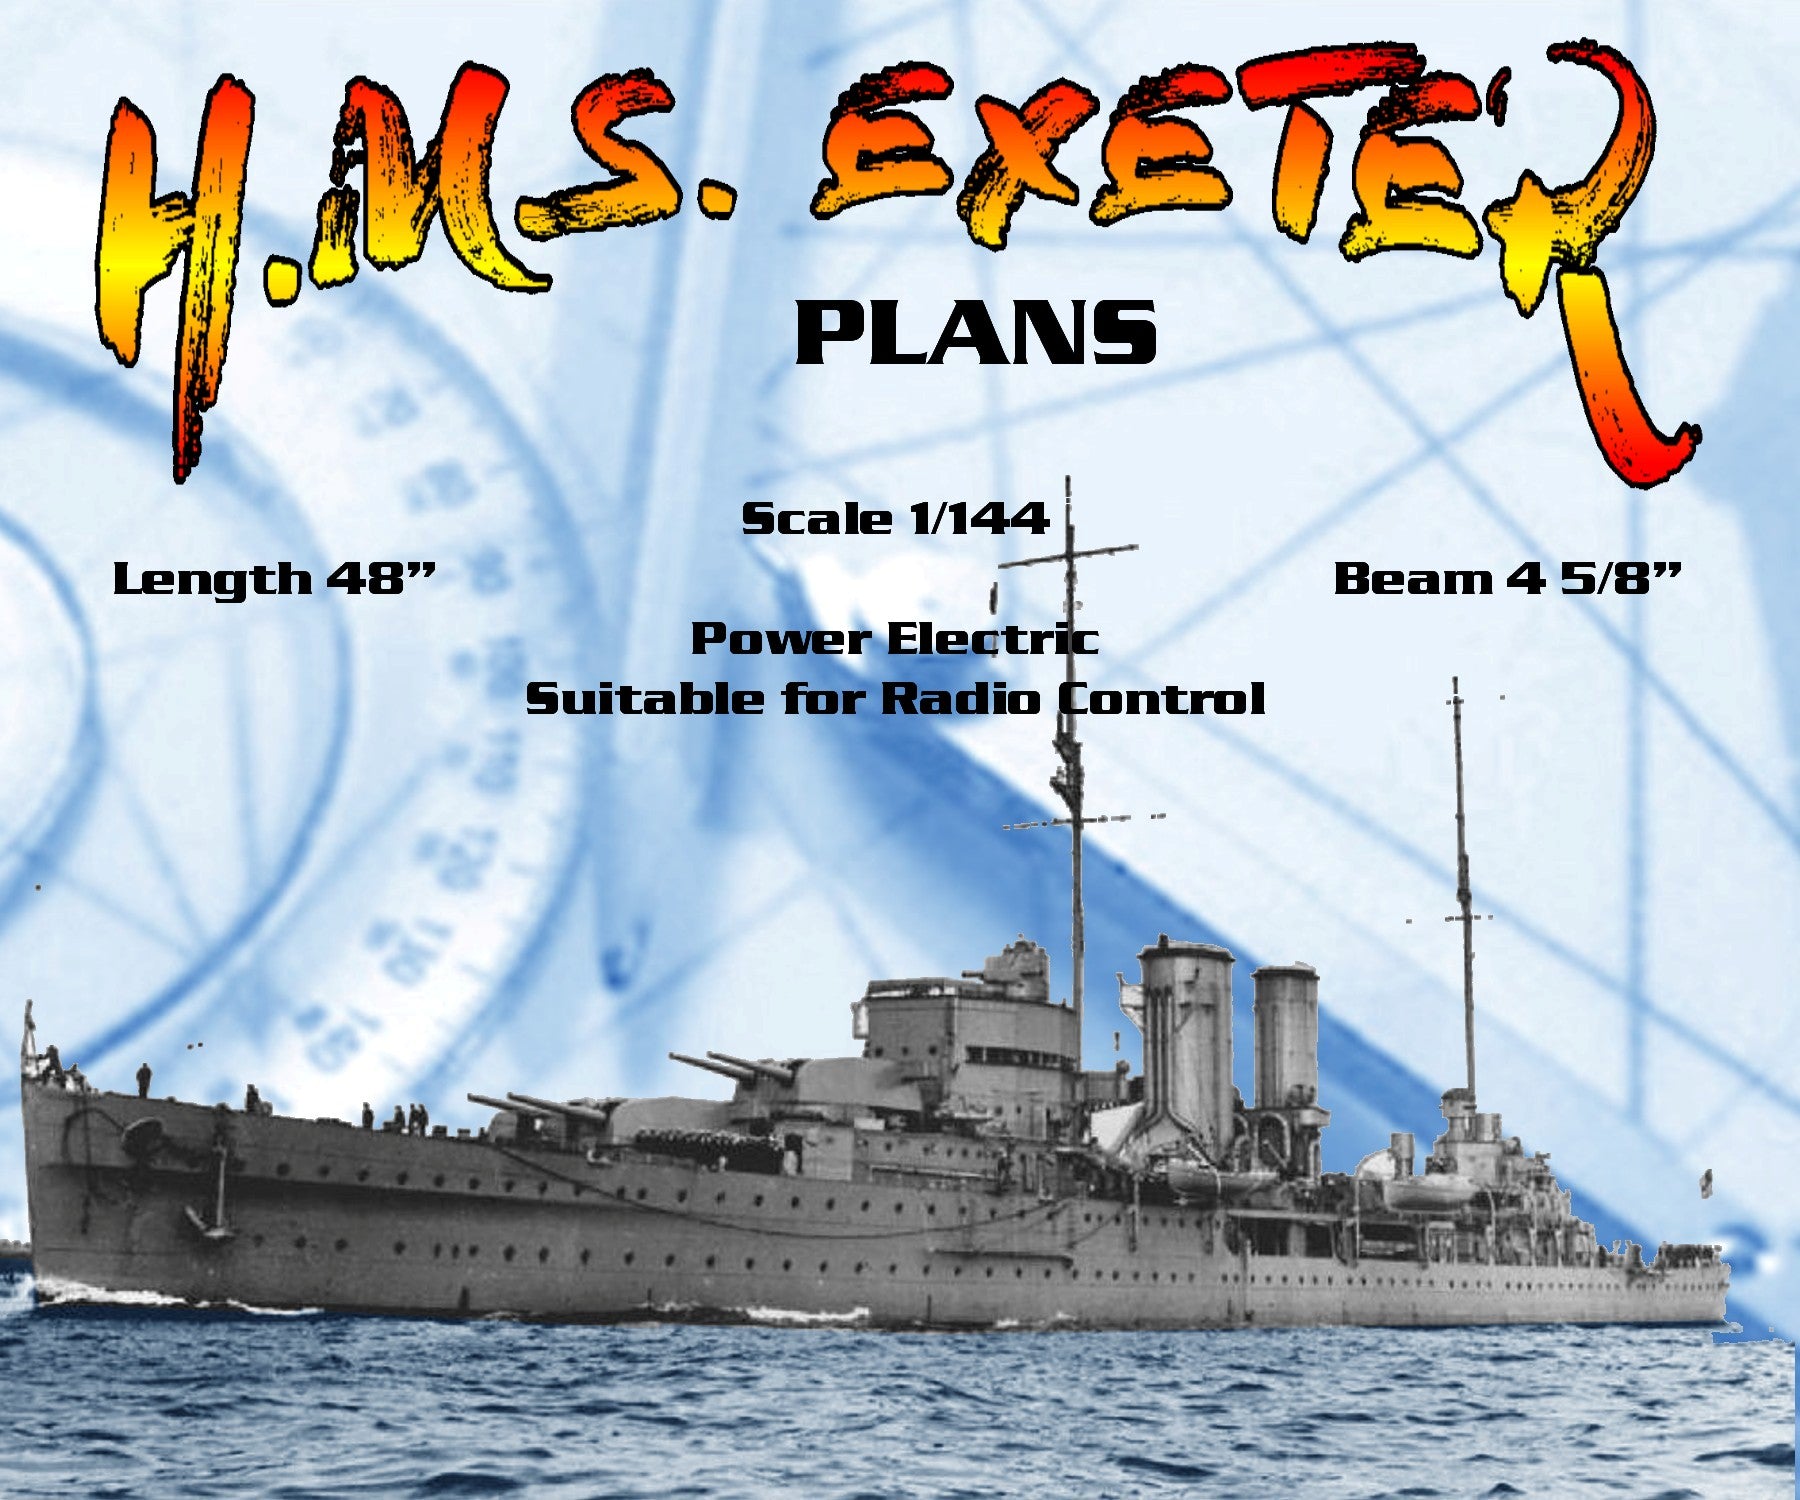 full size printed line drawings scale 1/144 york-class heavy cruiser h.m.s. exeter suitable for radio control